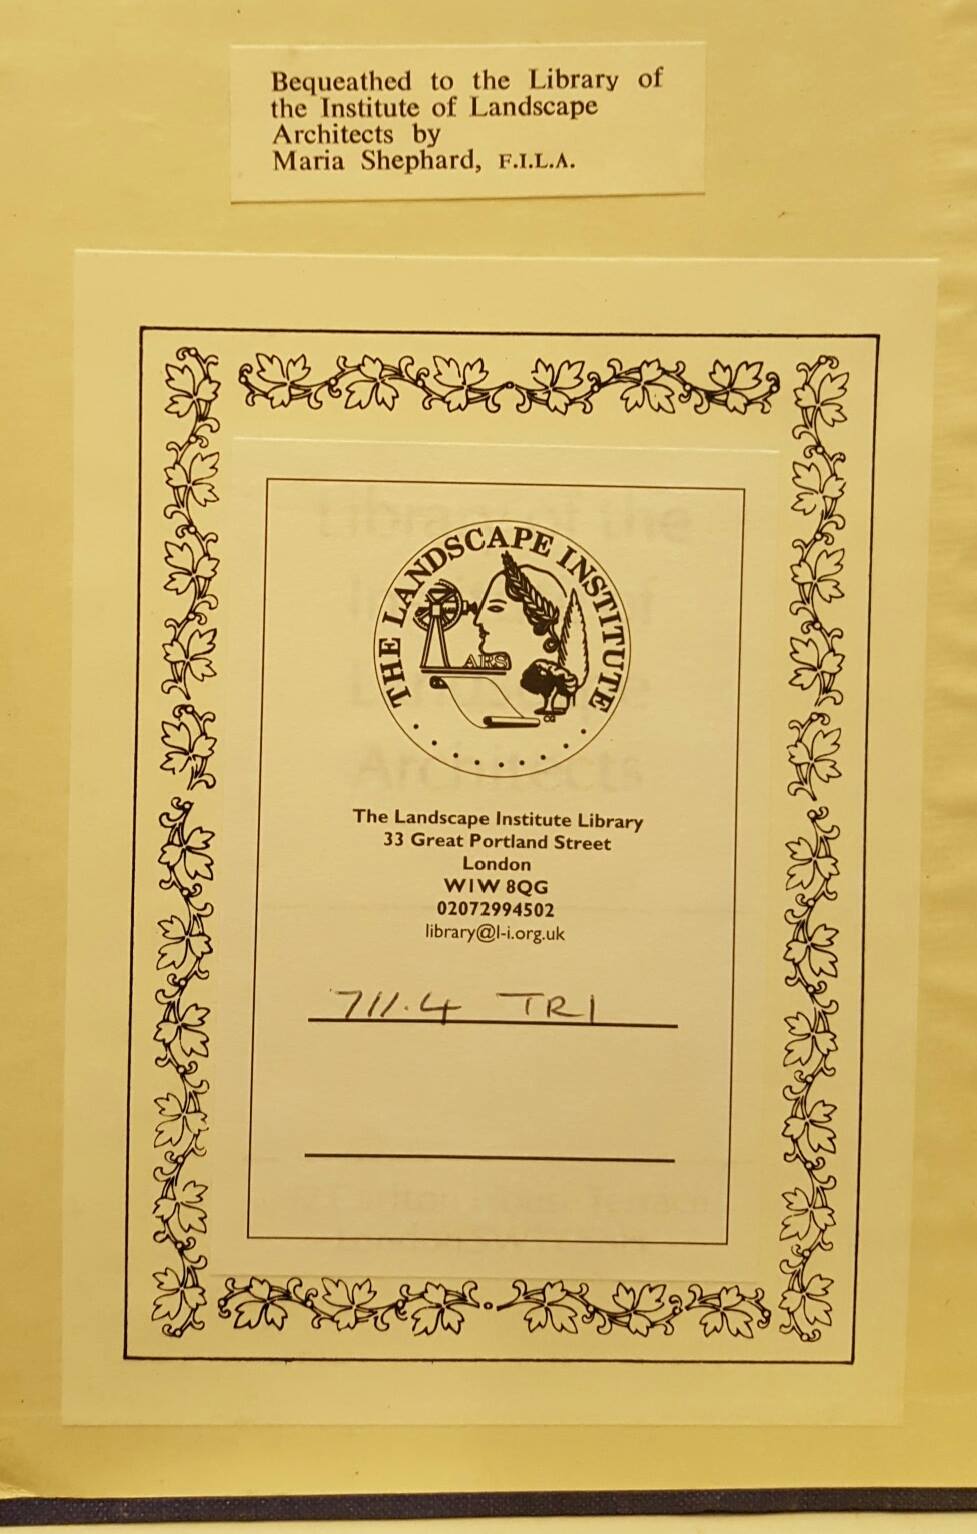 Bookplate showing previous life of the book as part of the LI library, donated to them by Maria Shephard (Tripp, Town Planning, 1942)